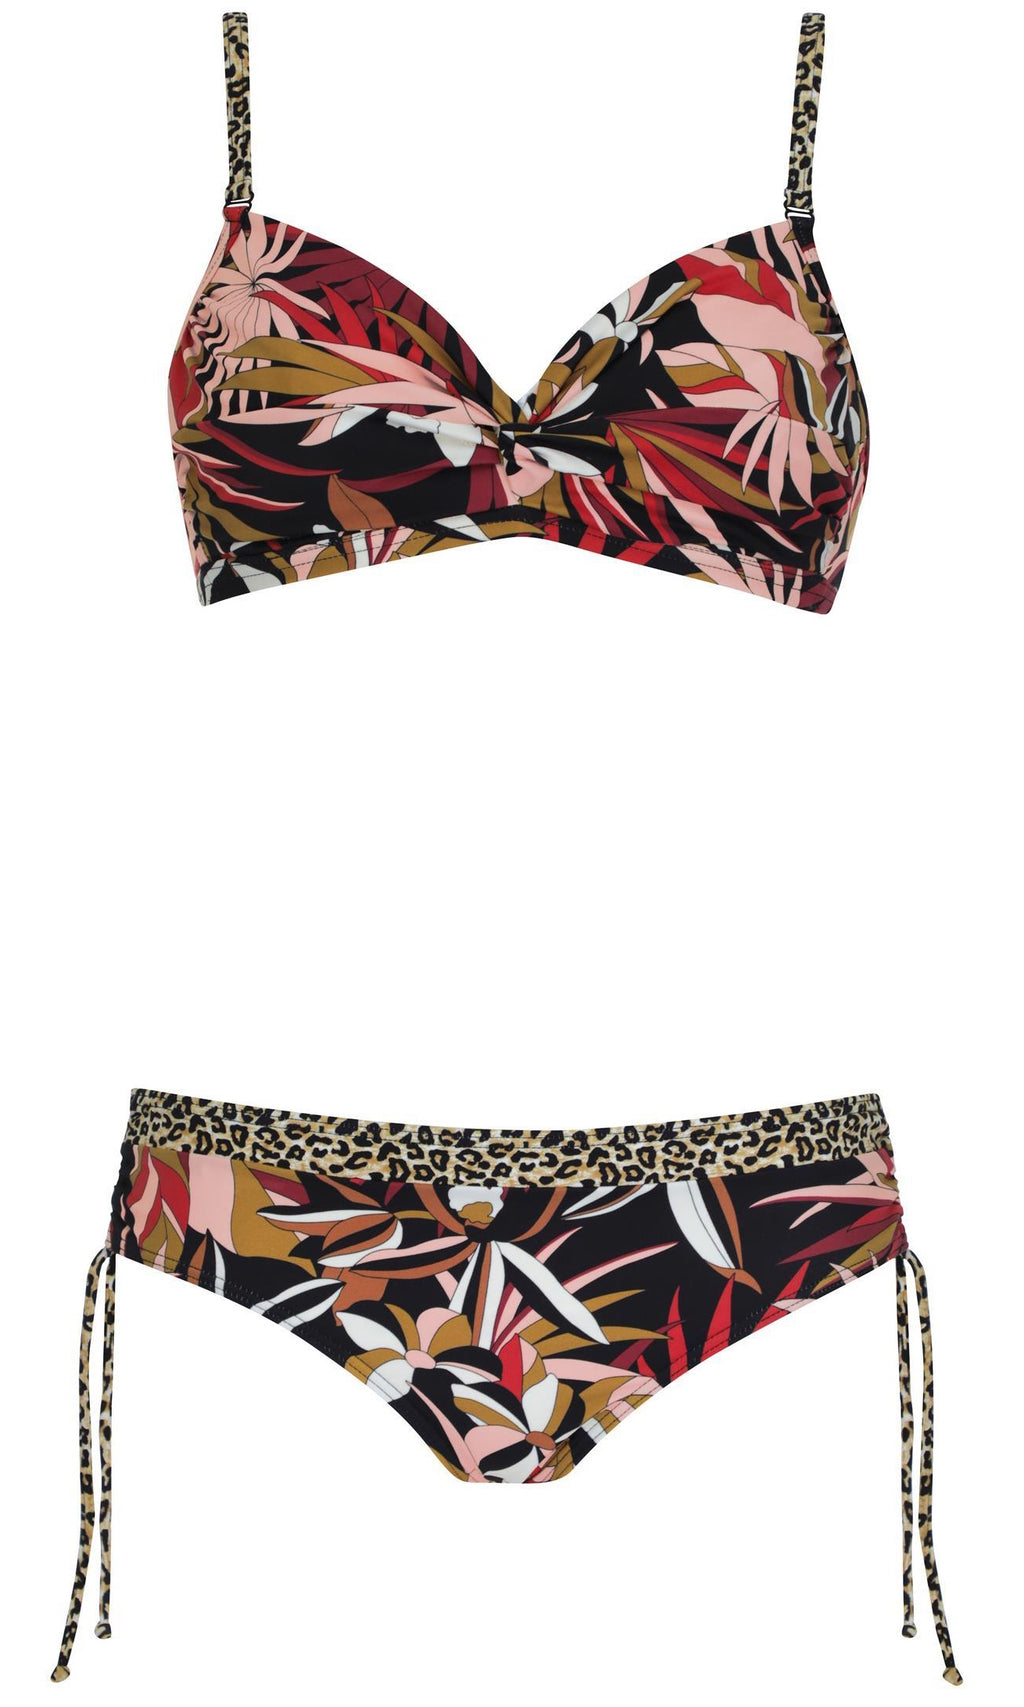 Bikini Set Cougar Jungle, Special Order B Cup to H Cup